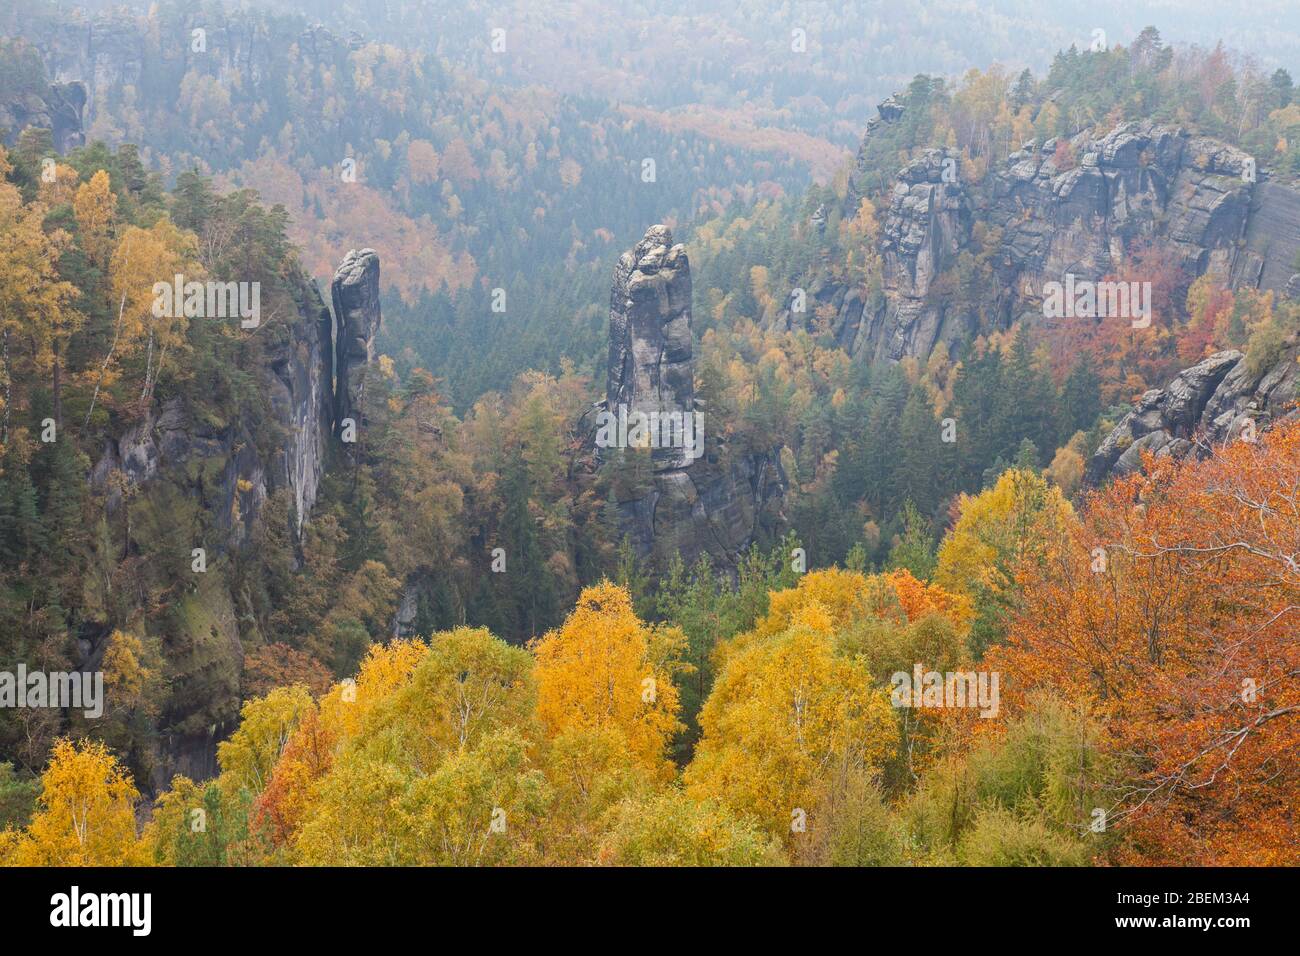 View from Carolafelsen to the Großer Dom / Grossen Dom, Elbe Sandstone Mountains, Saxonian Switzerland NP, Saxony, Germany Stock Photo